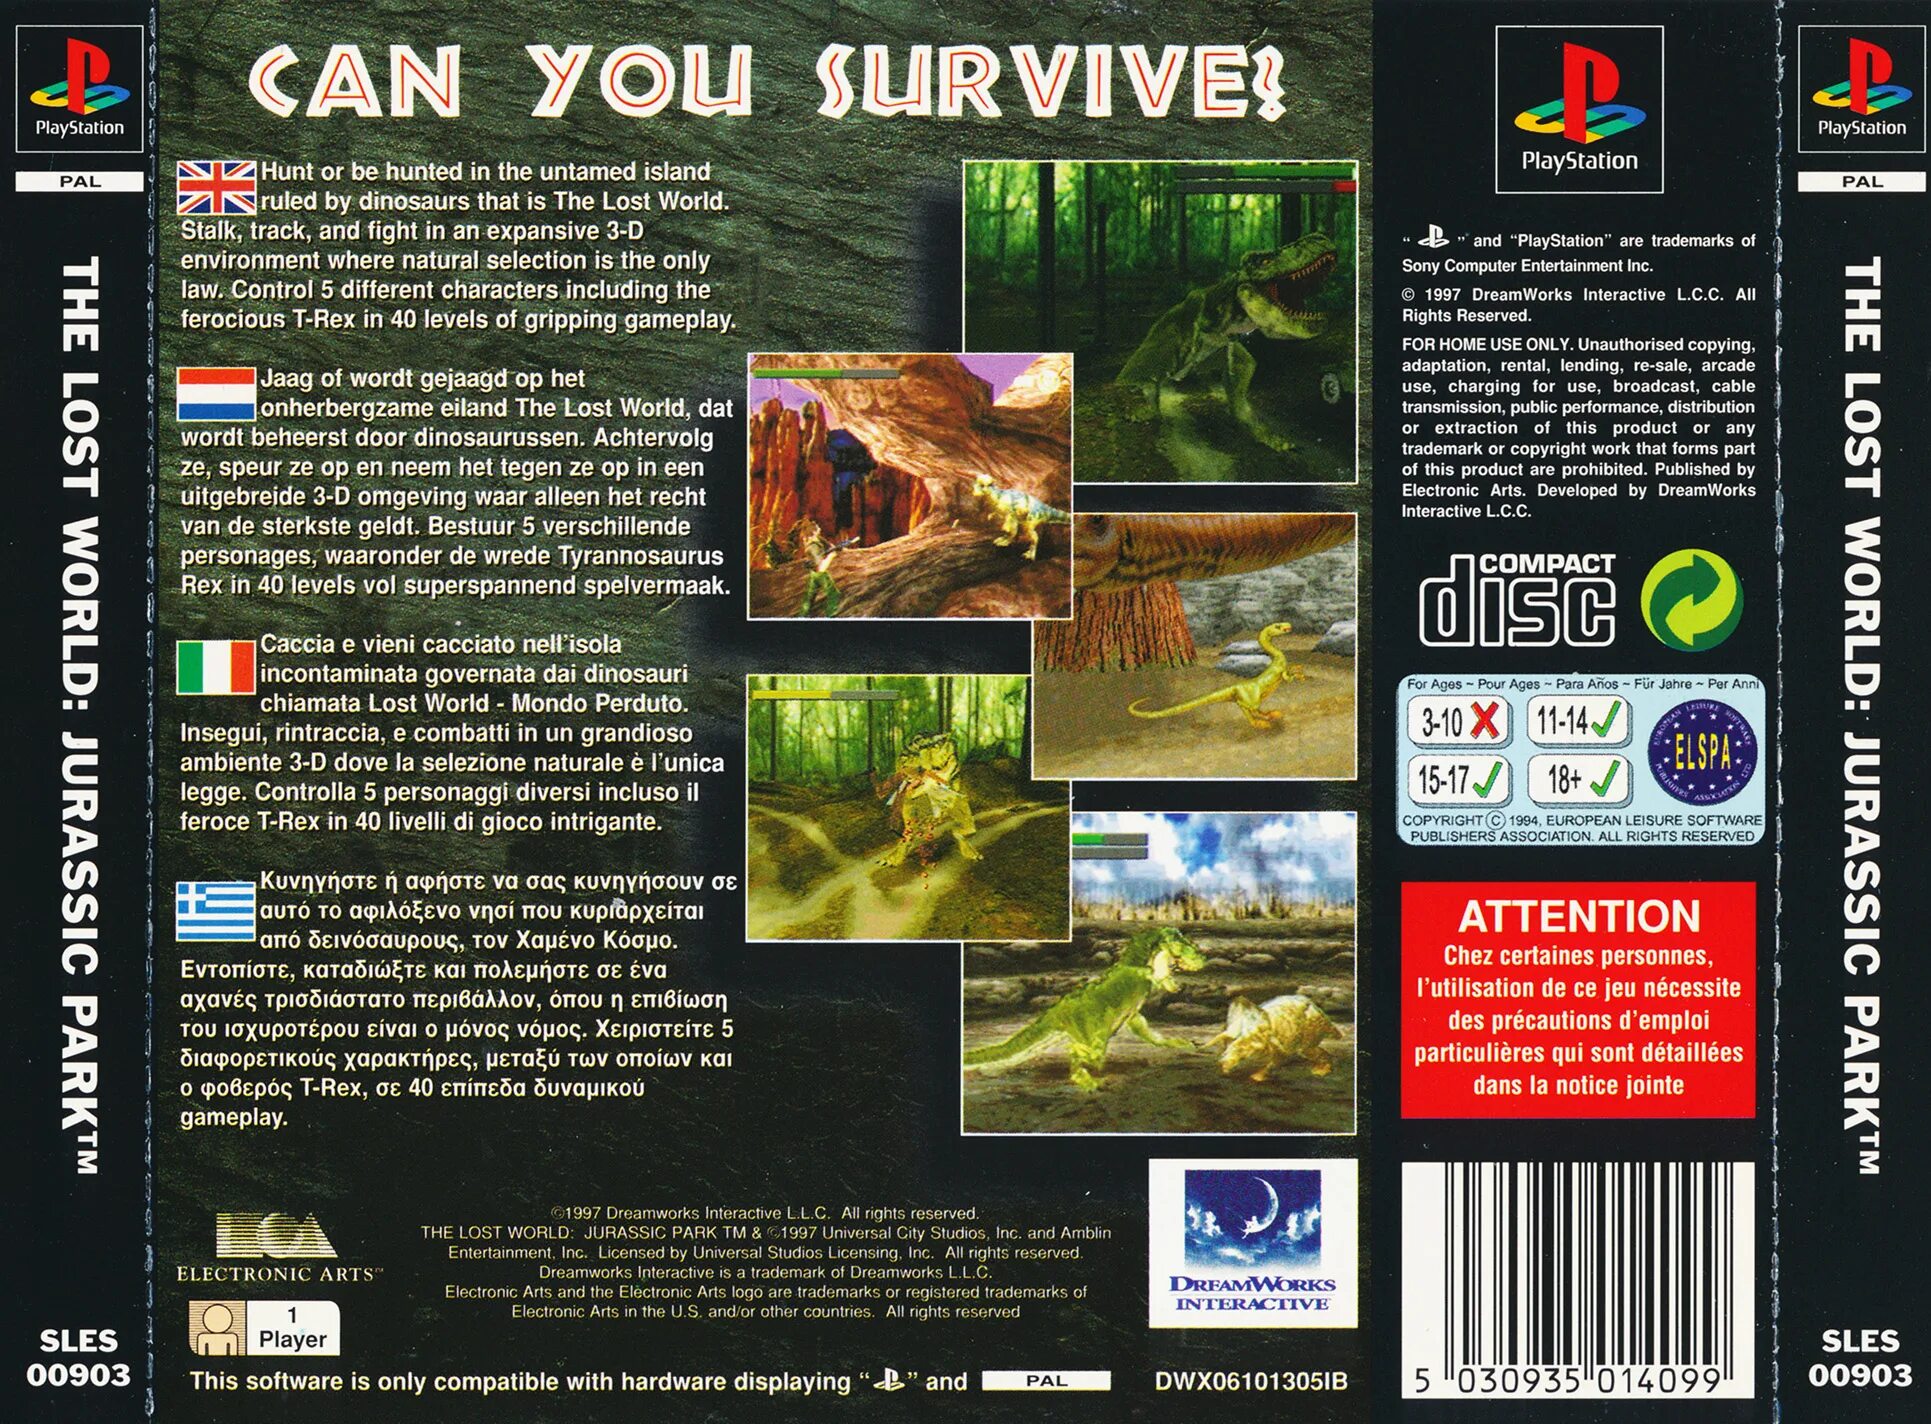 Lost world 1. The Lost World Jurassic Park ps1. Игра Jurassic Park PS 1. Warpath Jurassic Park ps1. The Lost World Jurassic Park ps1 обложка.